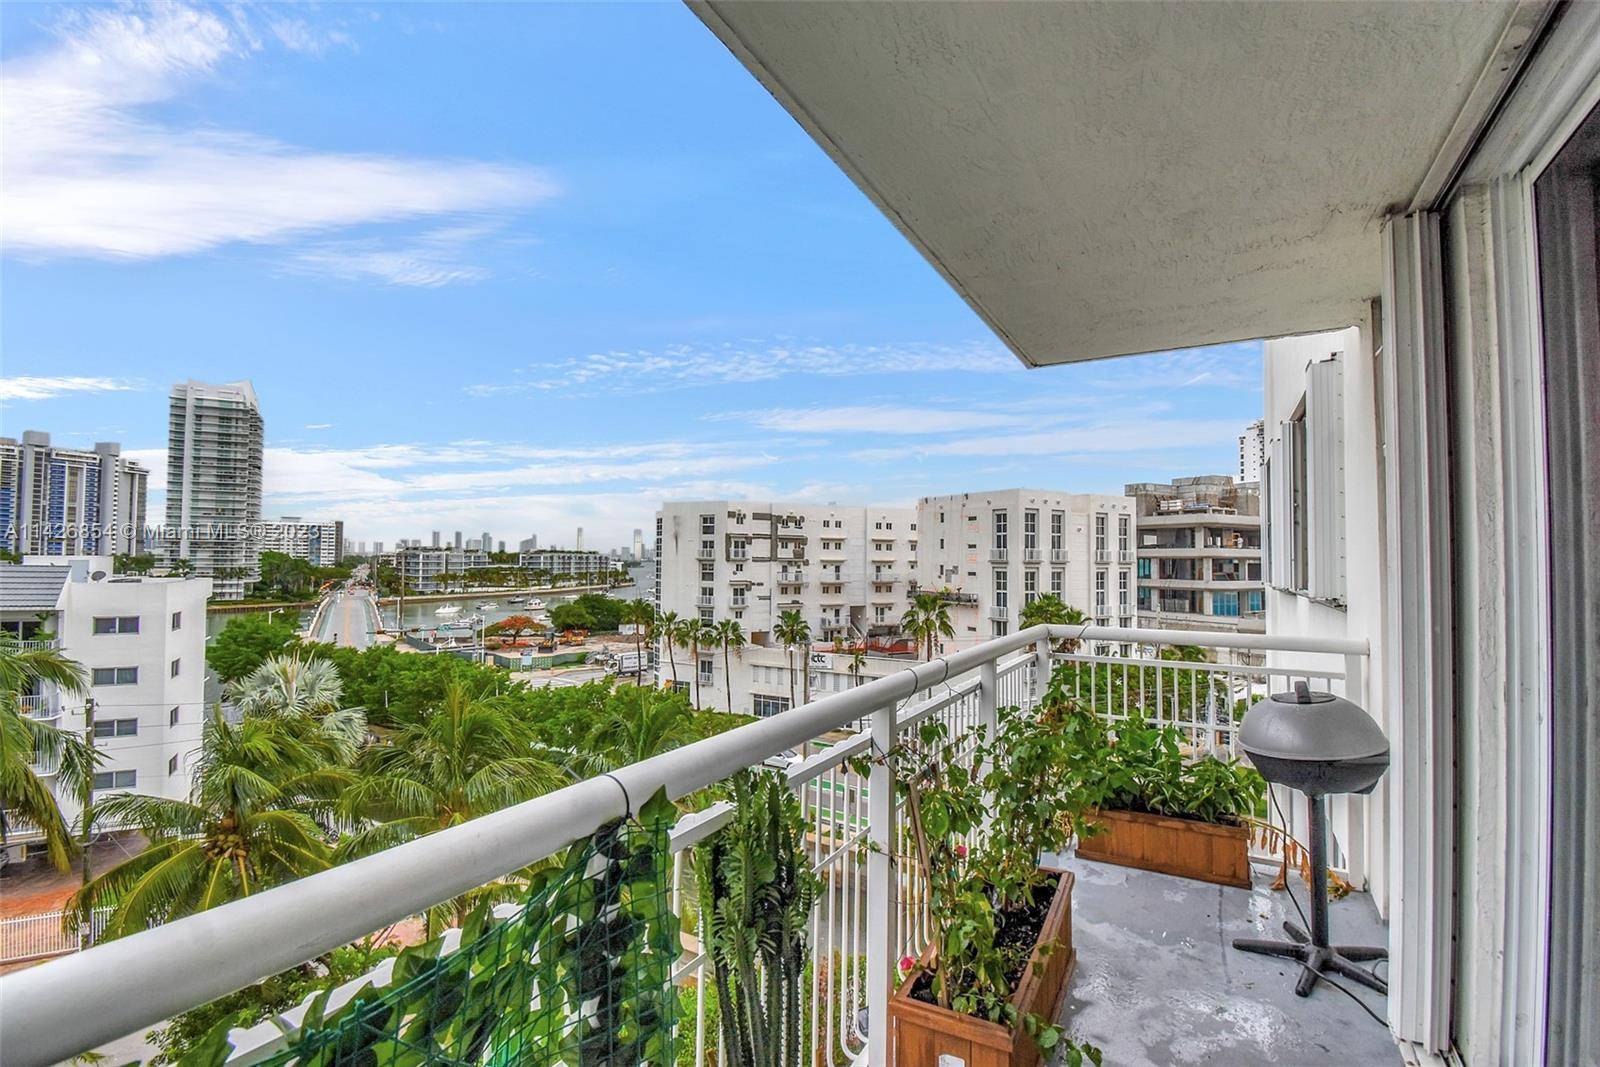 Step inside one of the best units in the building a corner unit featuring a split floor plan with 2 bedrooms and 2 baths.